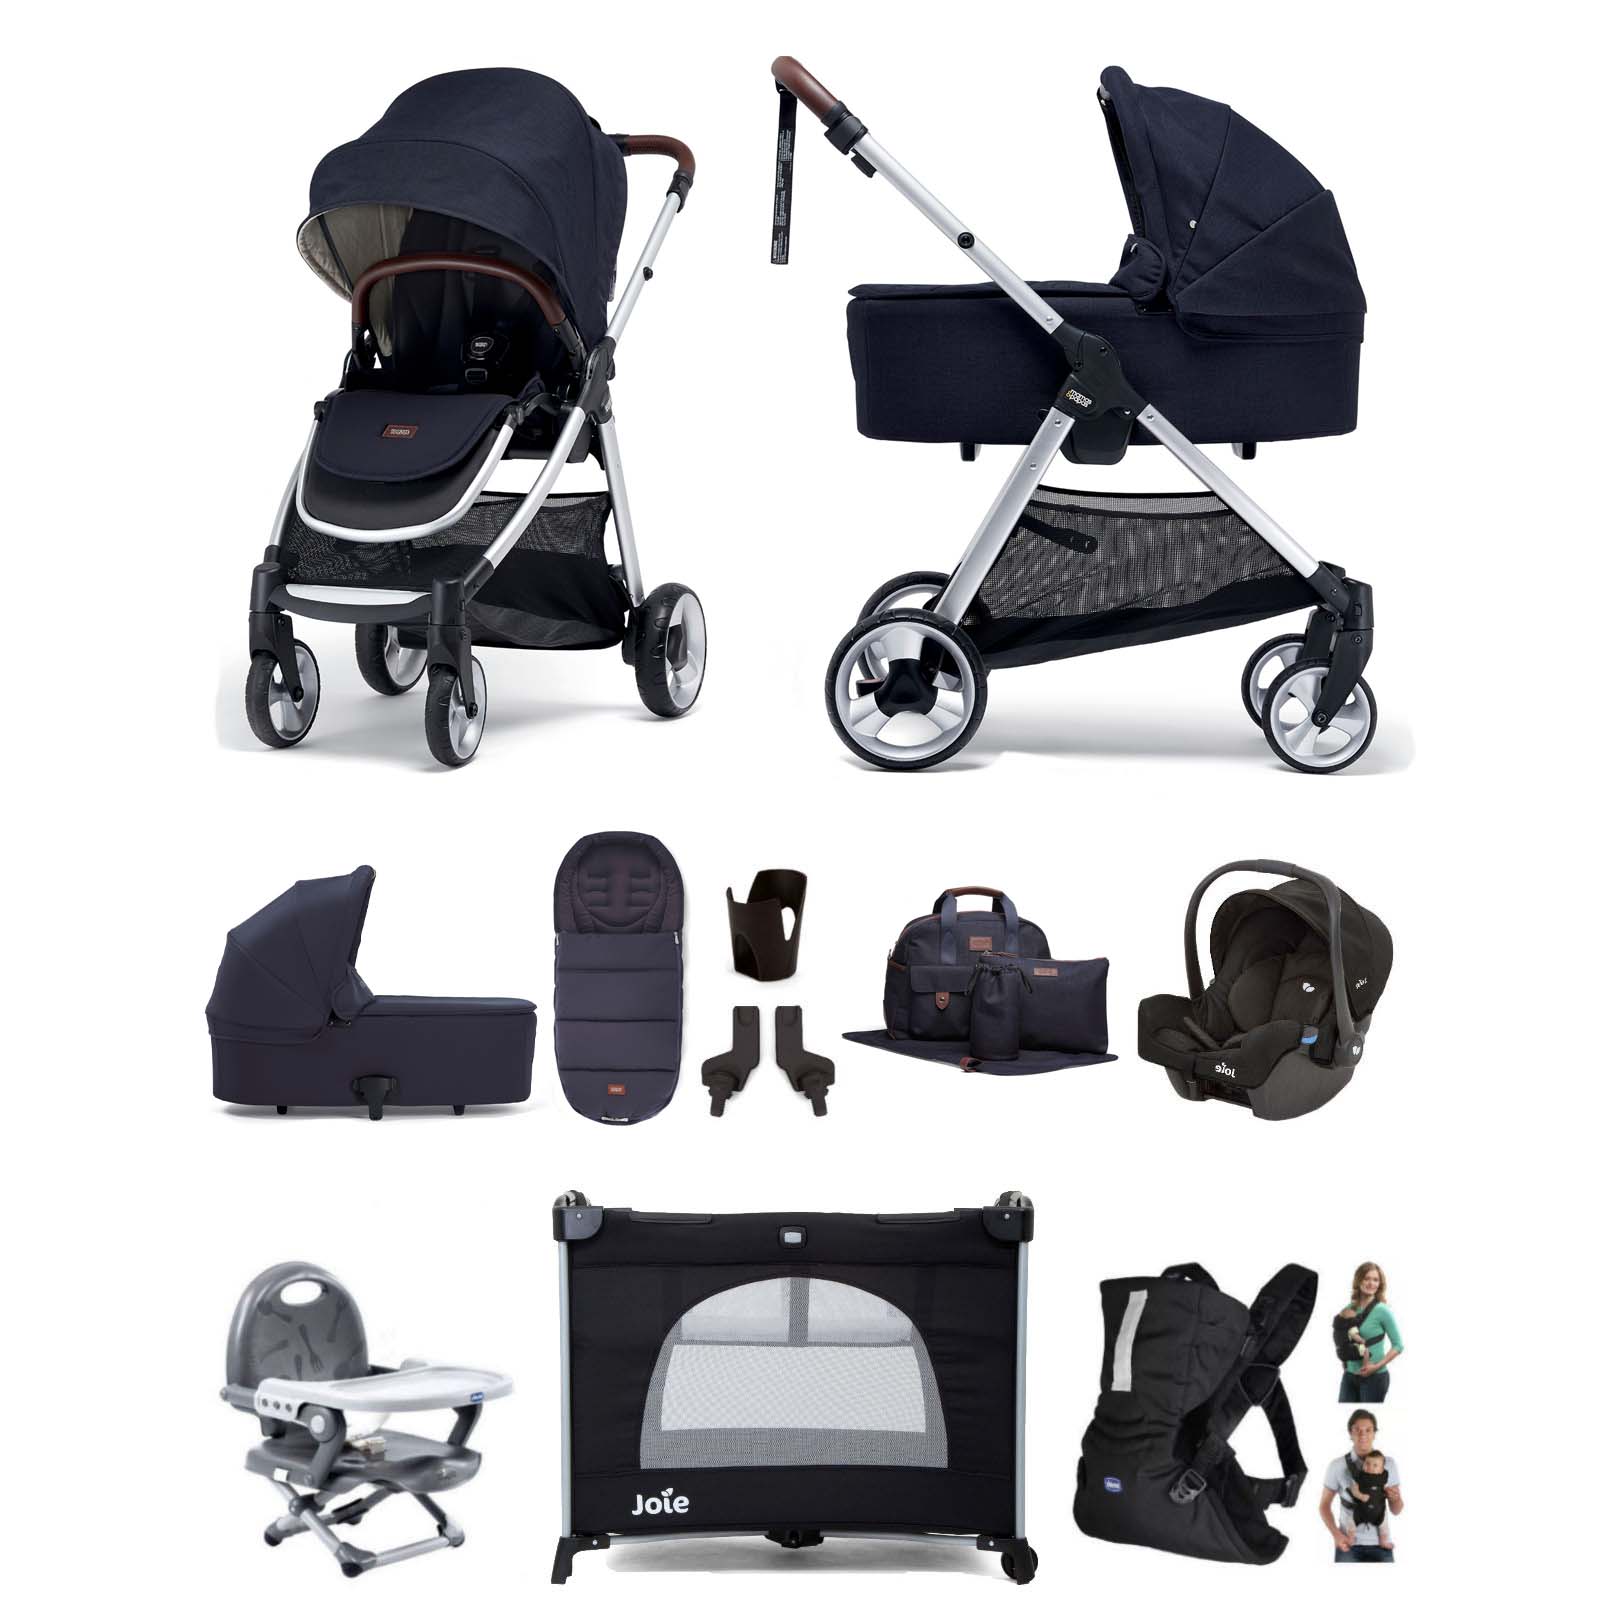 Mamas & Papas Flip XT2 10pc Essentials (Gemm Car Seat) Everything You Need Travel System Bundle with Carrycot - Navy